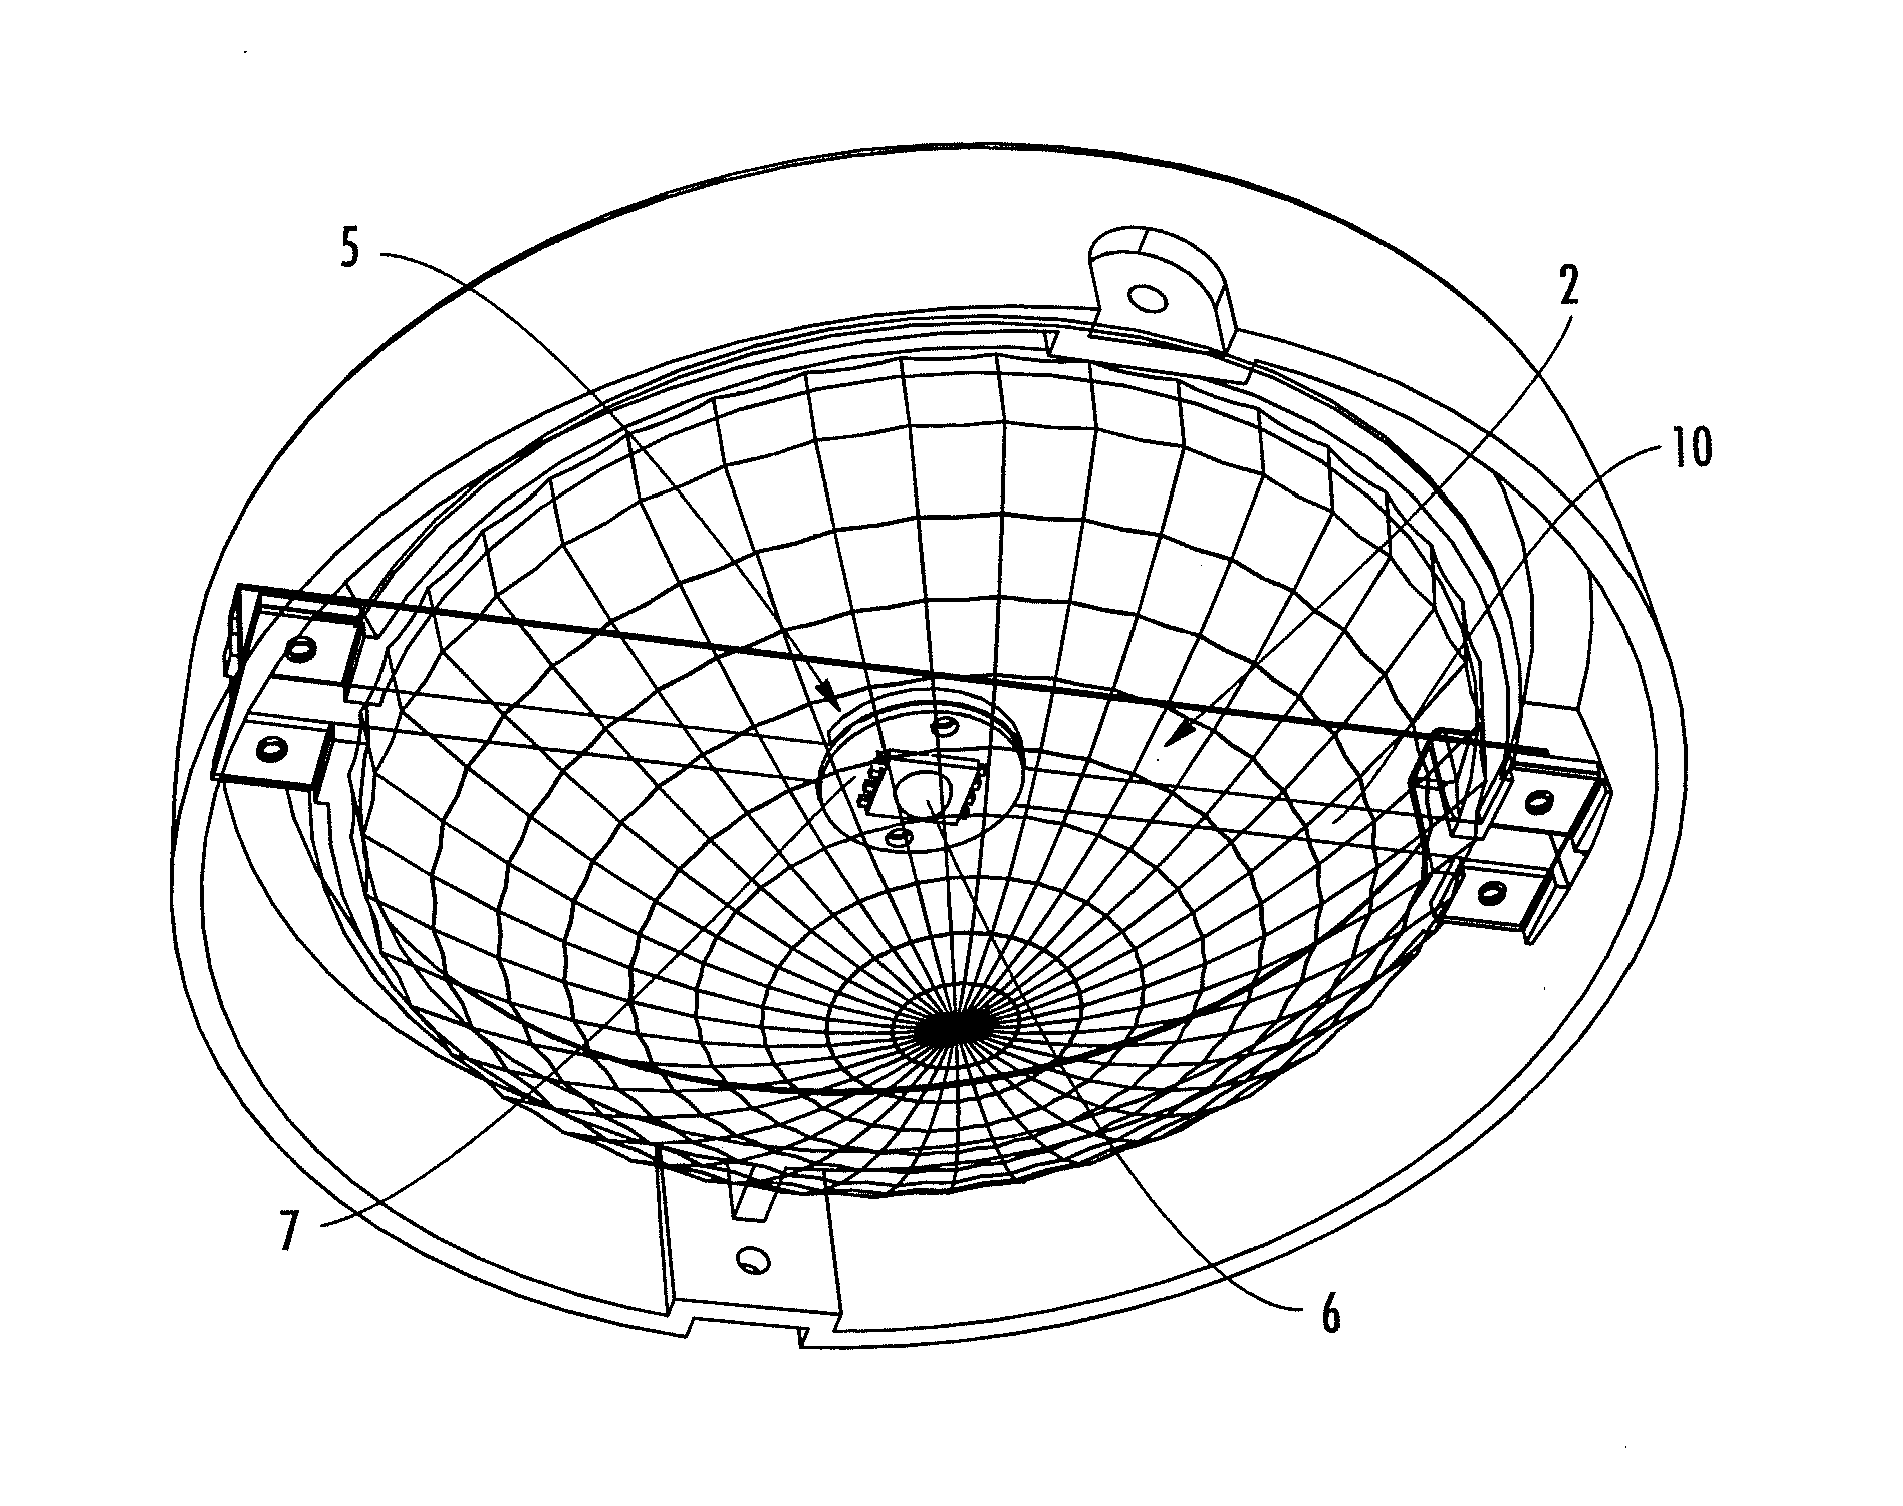 Non-glare reflective LED lighting apparatus with heat sink mounting